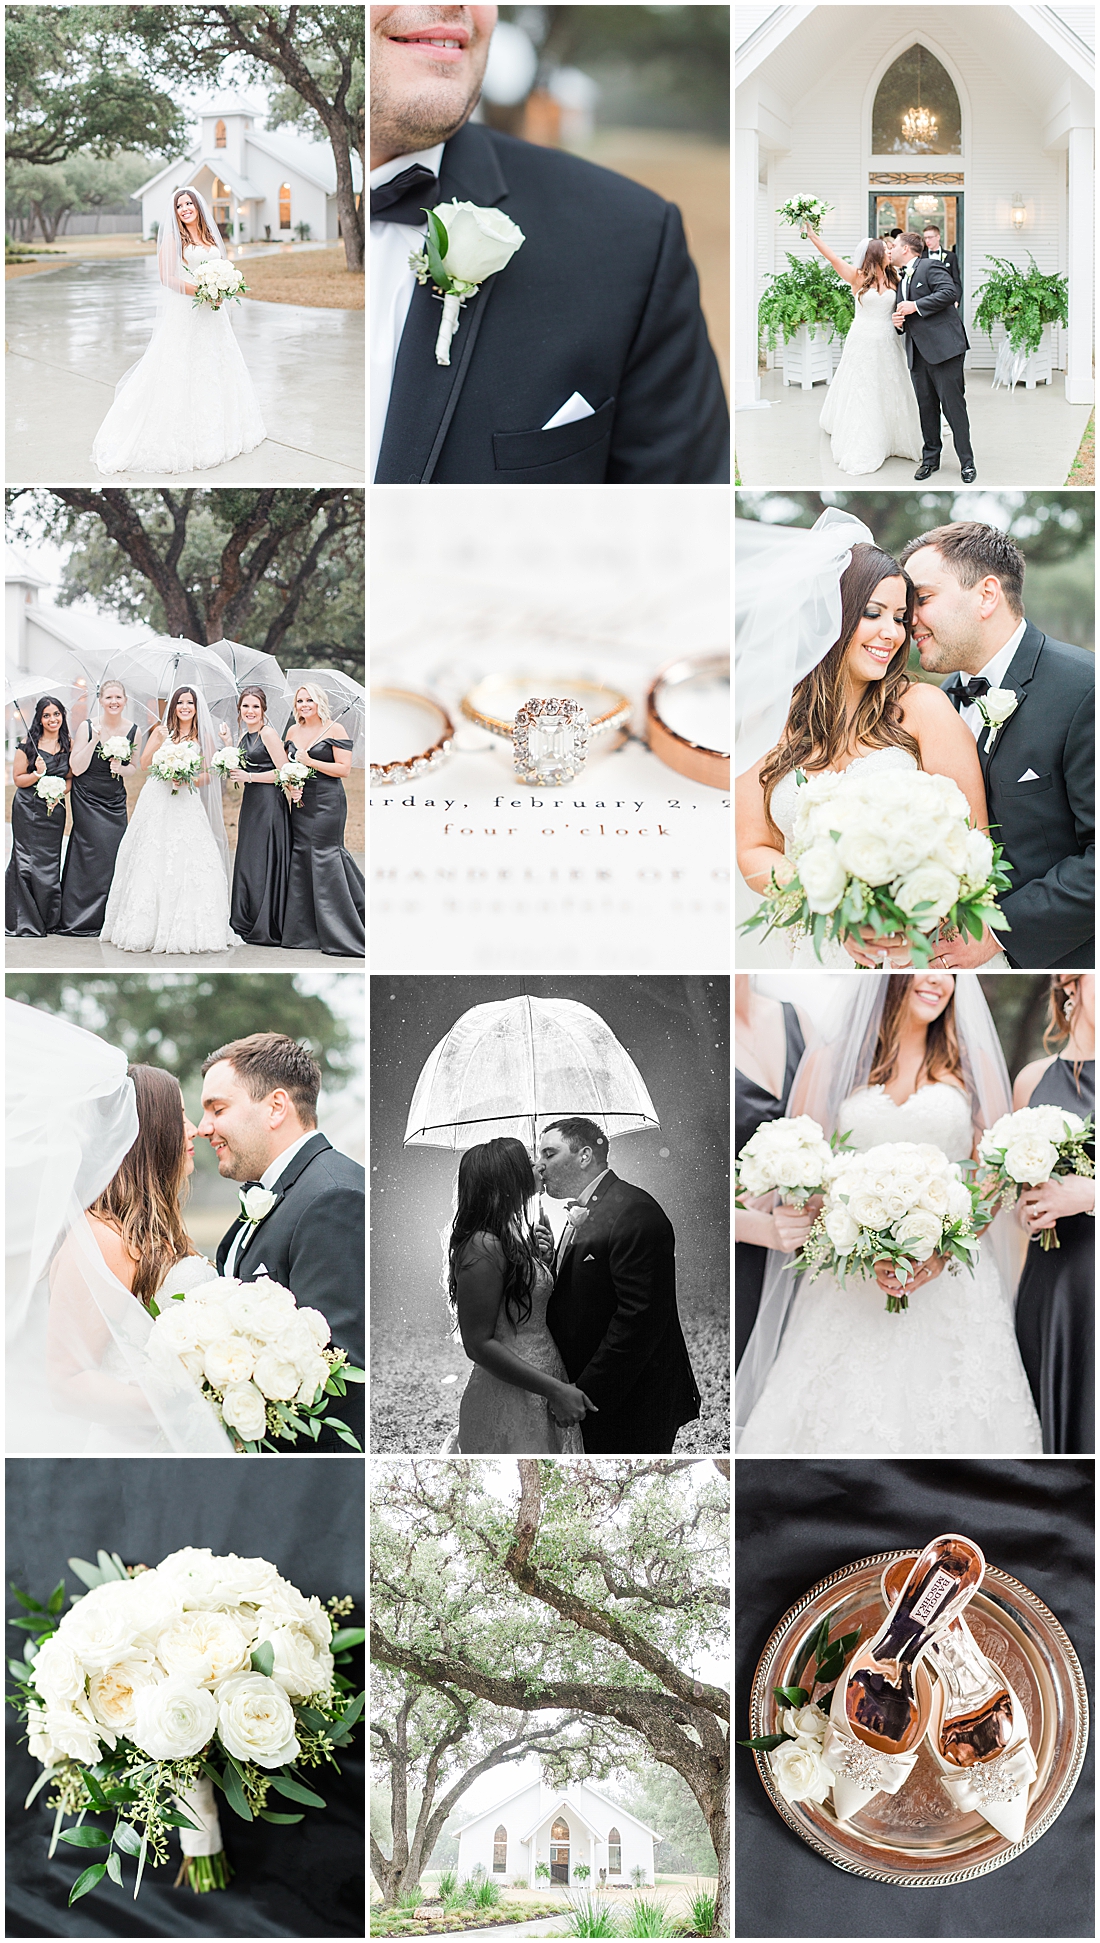 A Rainy Day Black and White Wedding at The Chandelier of Gruene 0111